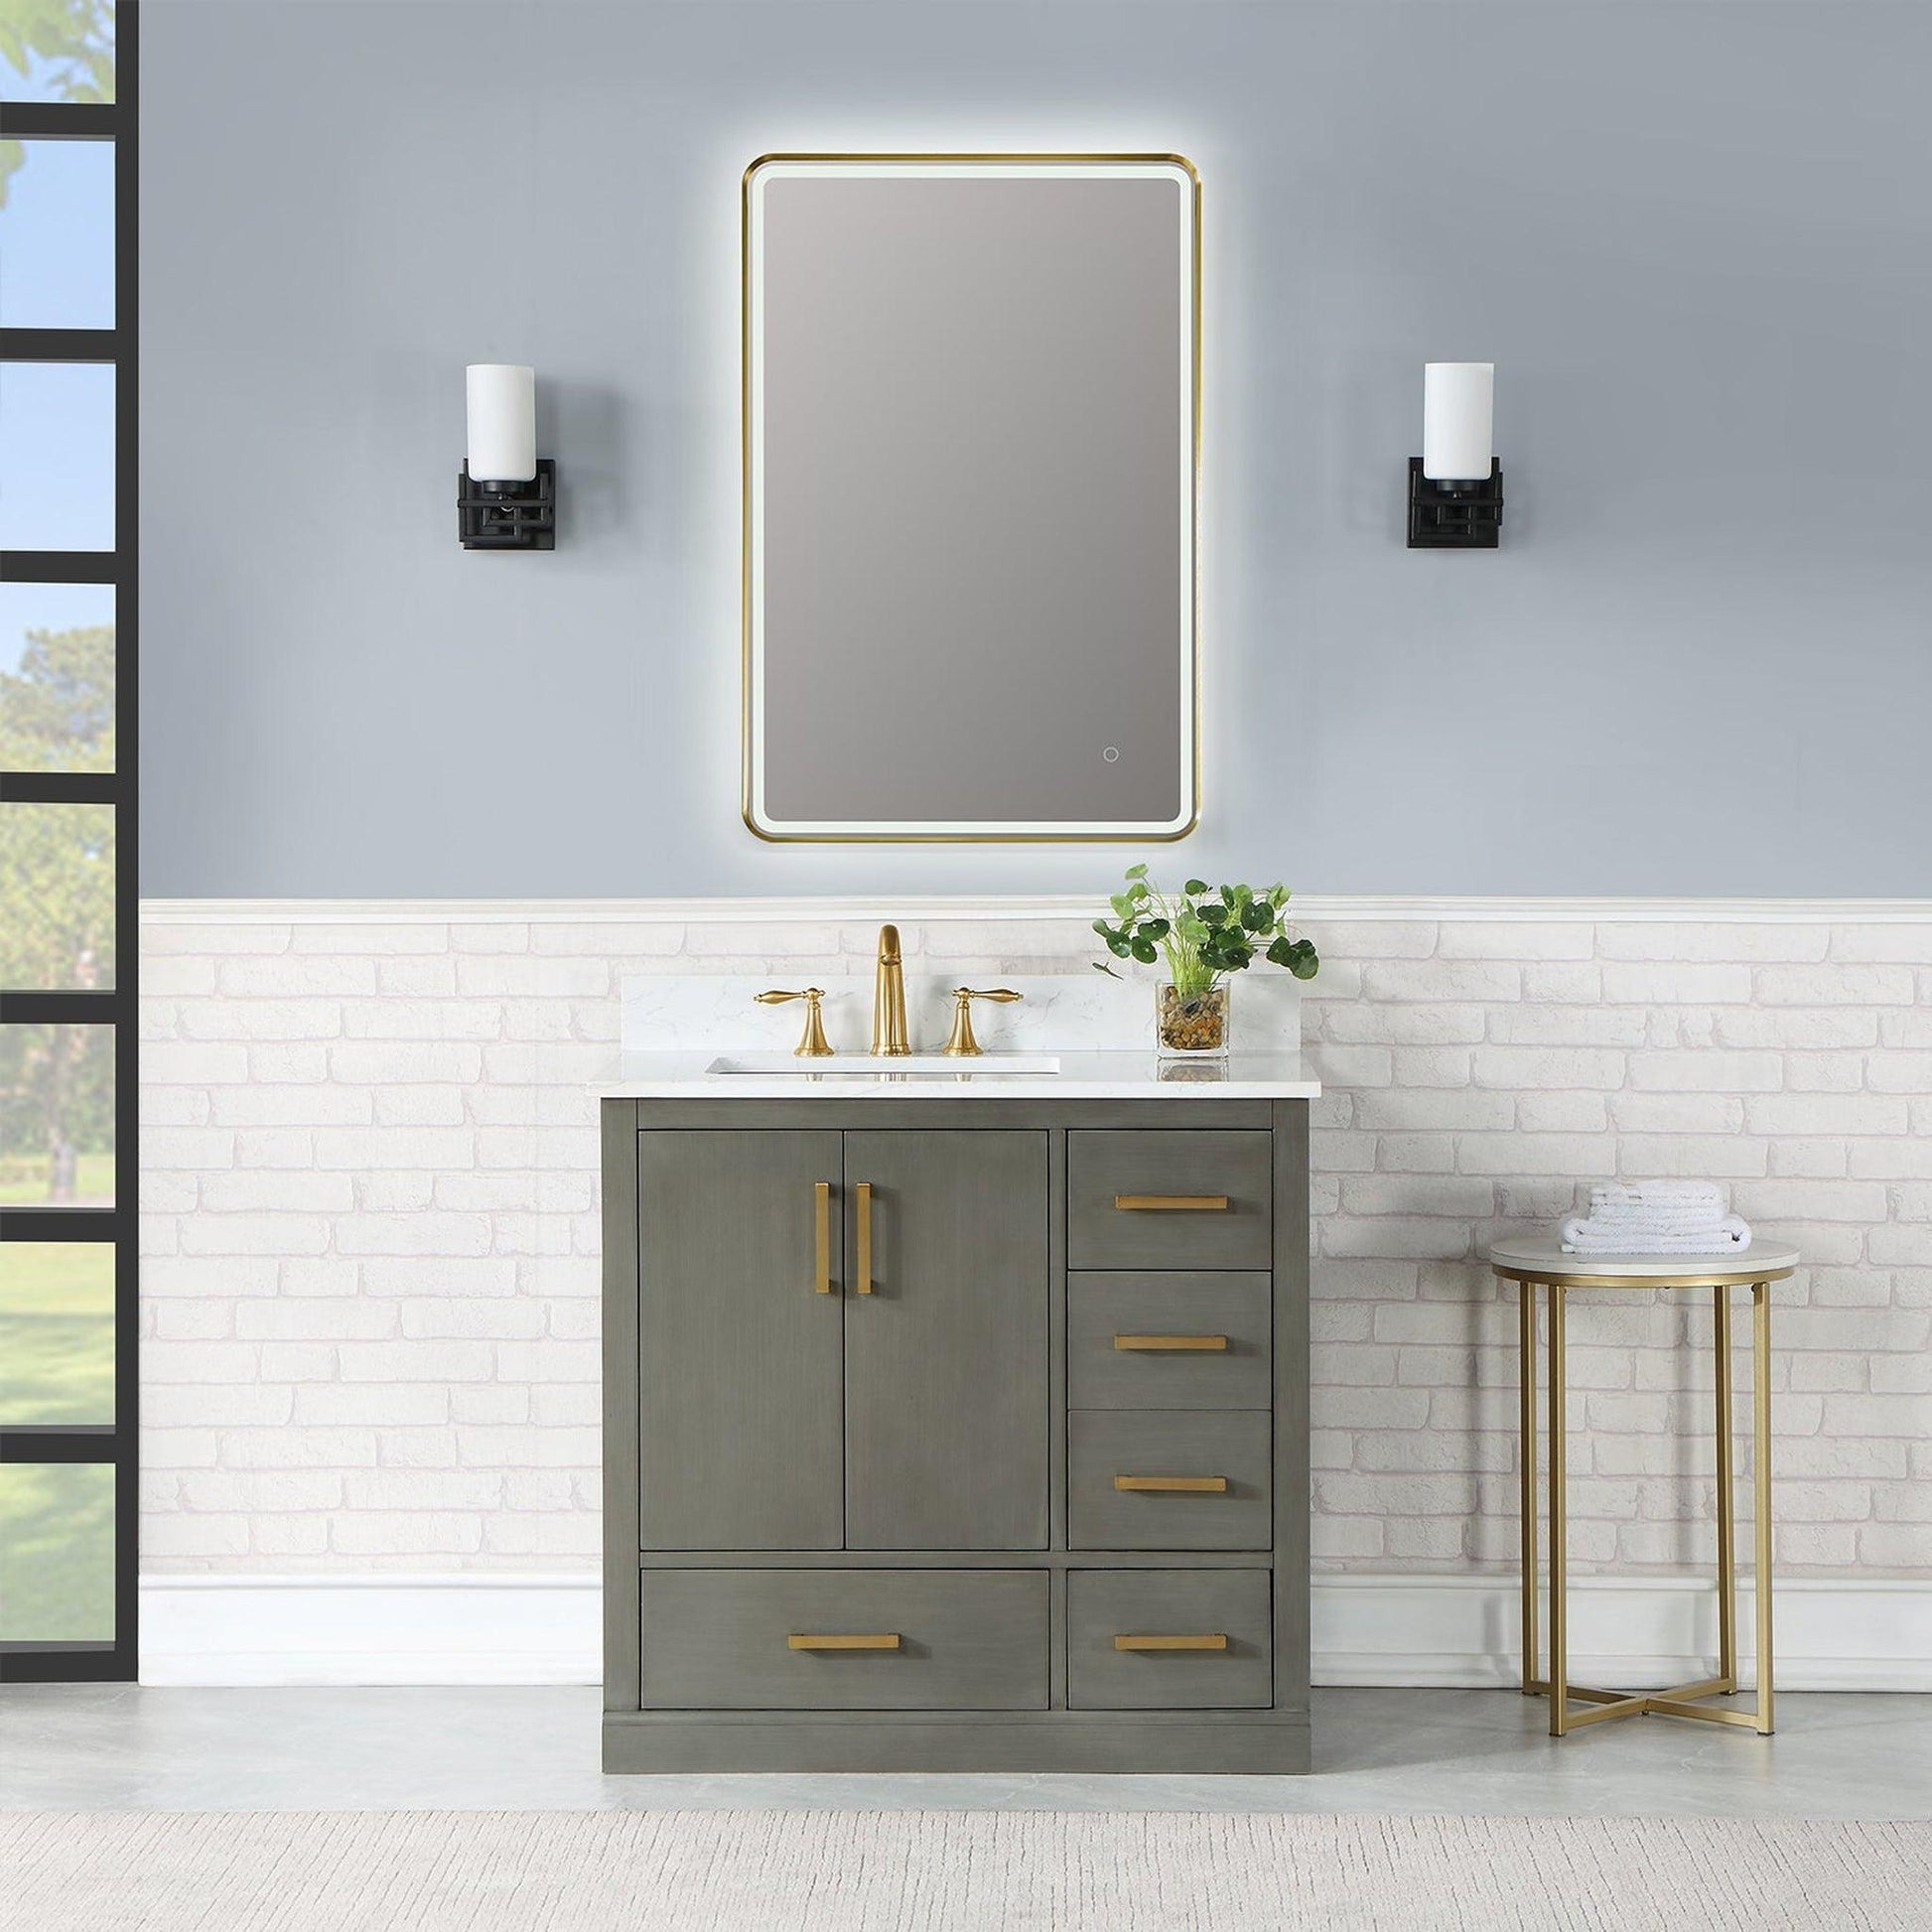 Altair Viaggi 24" Rectangle Brushed Gold Wall-Mounted LED Mirror